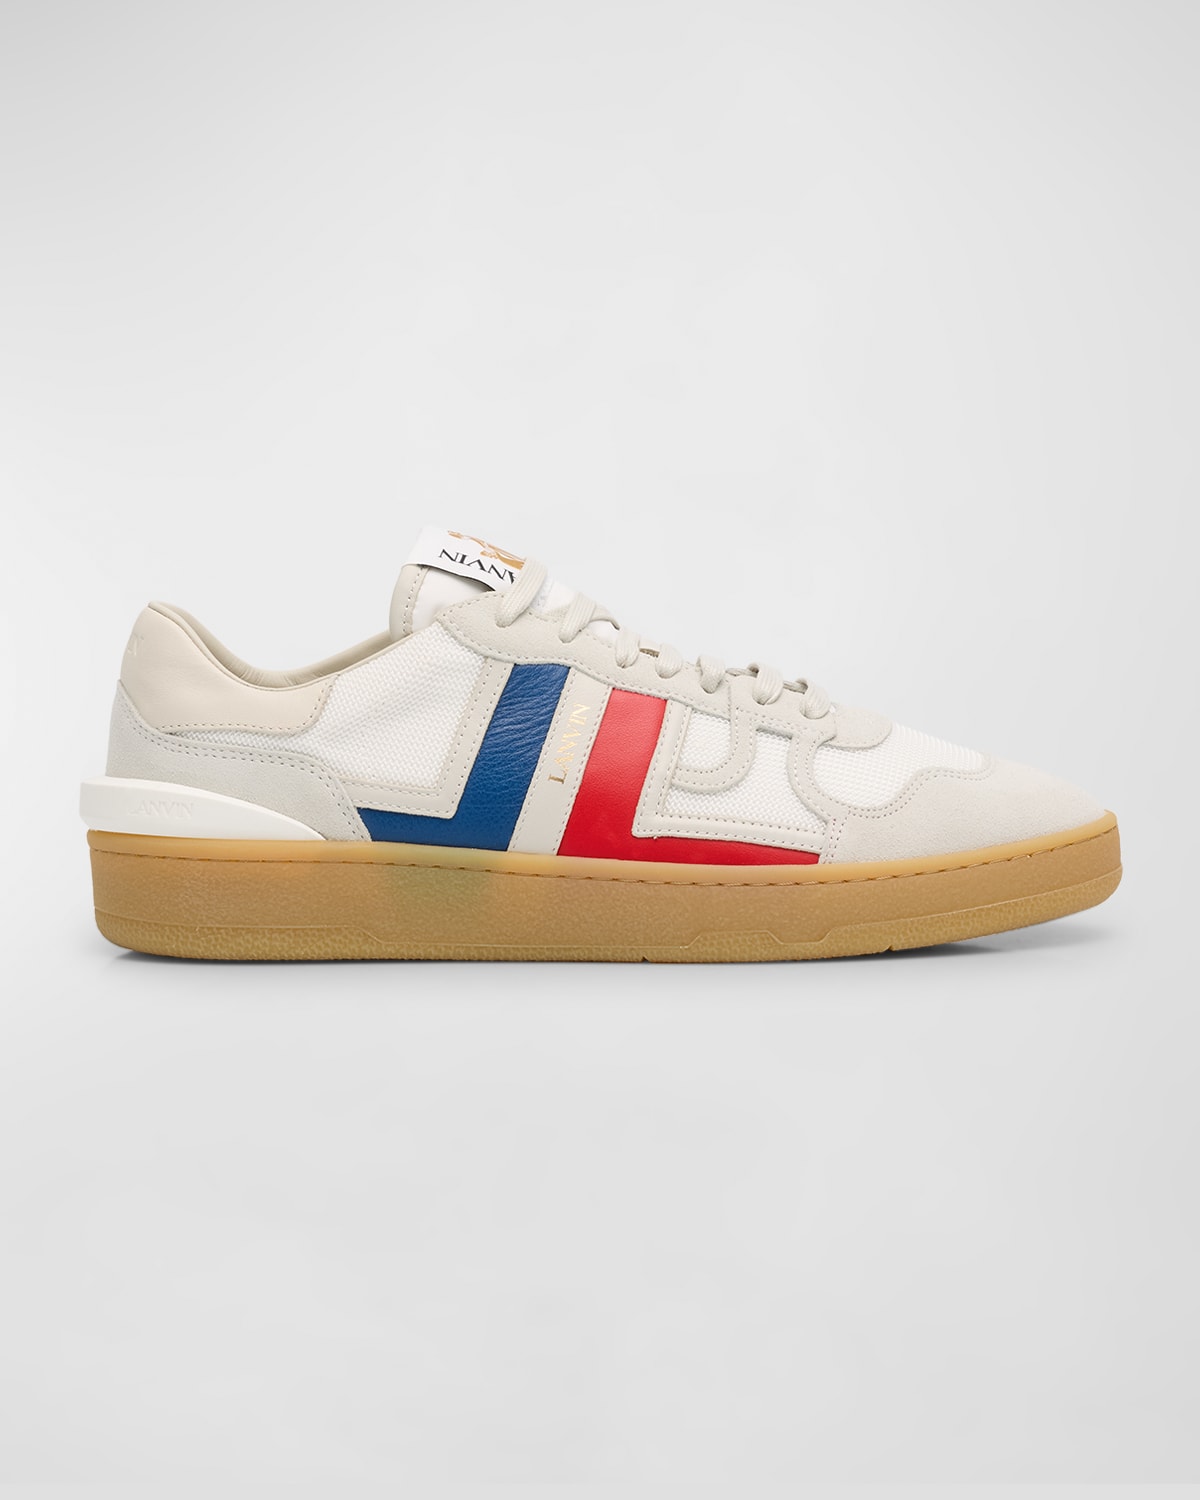 Shop Lanvin Men's Clay Textile And Leather Low-top Sneakers In White/blue/red